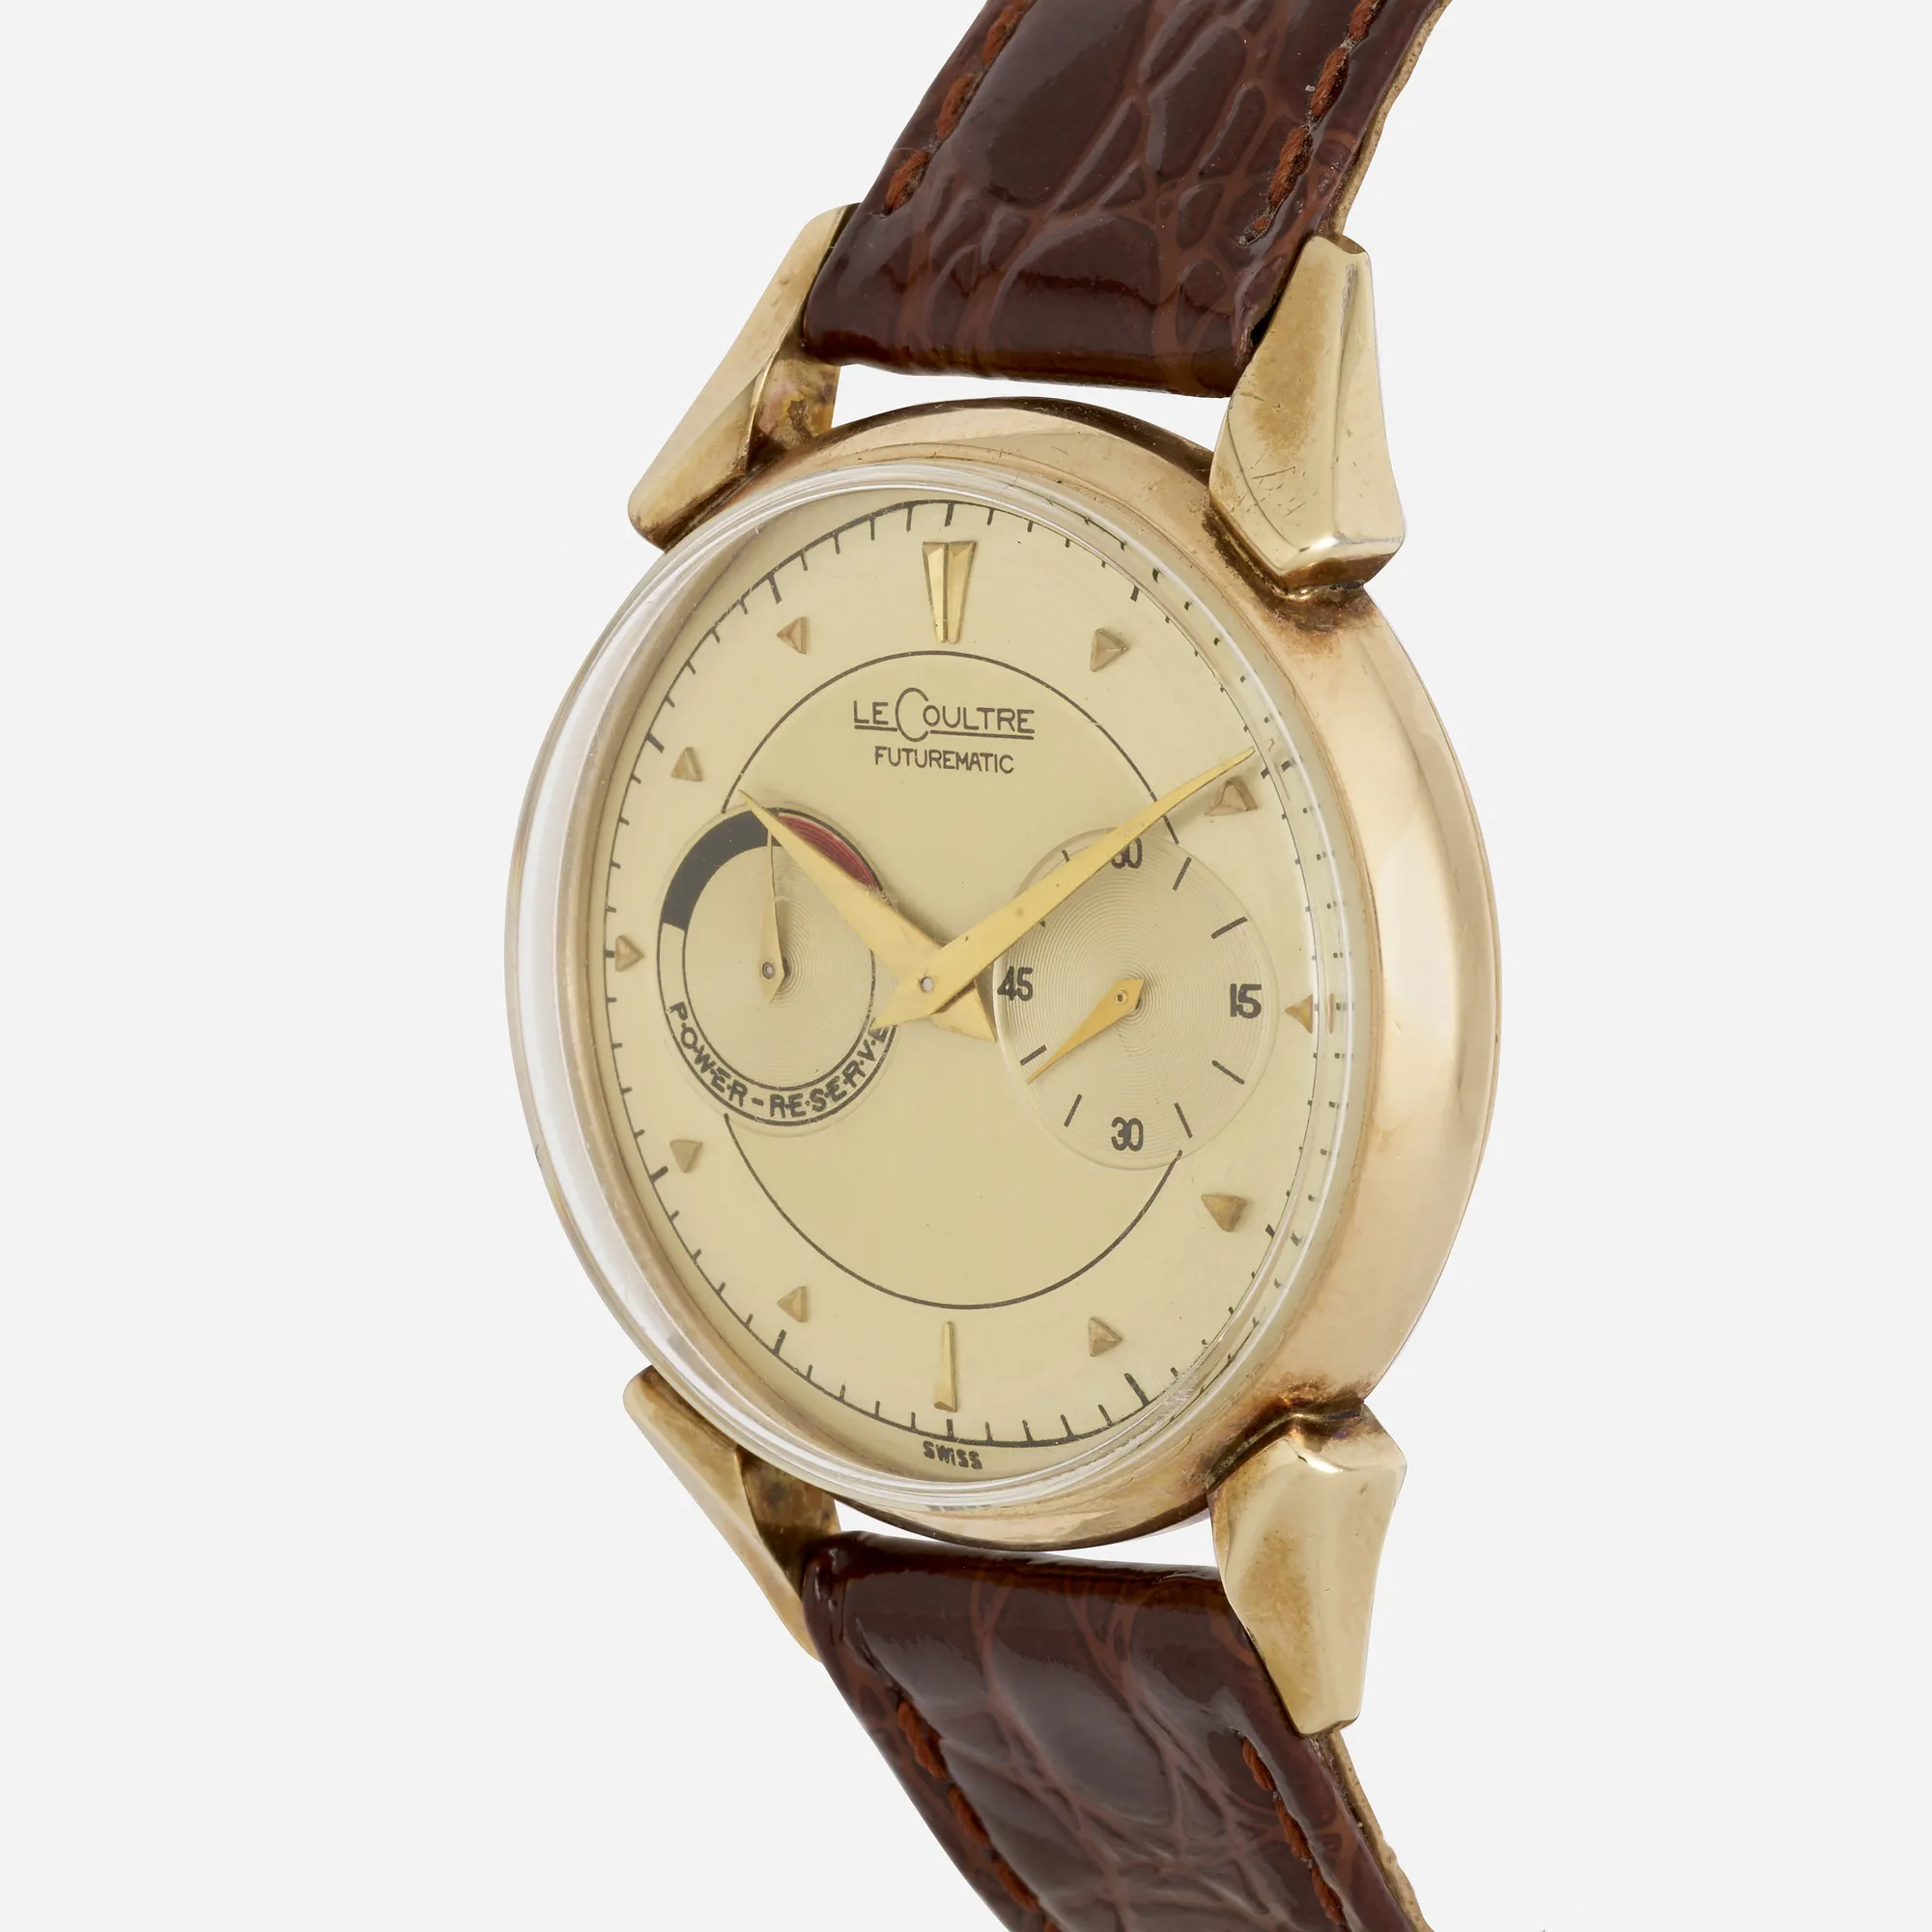 Jaeger-LeCoultre Futurematic 44mm Gold-plated Champagne 1